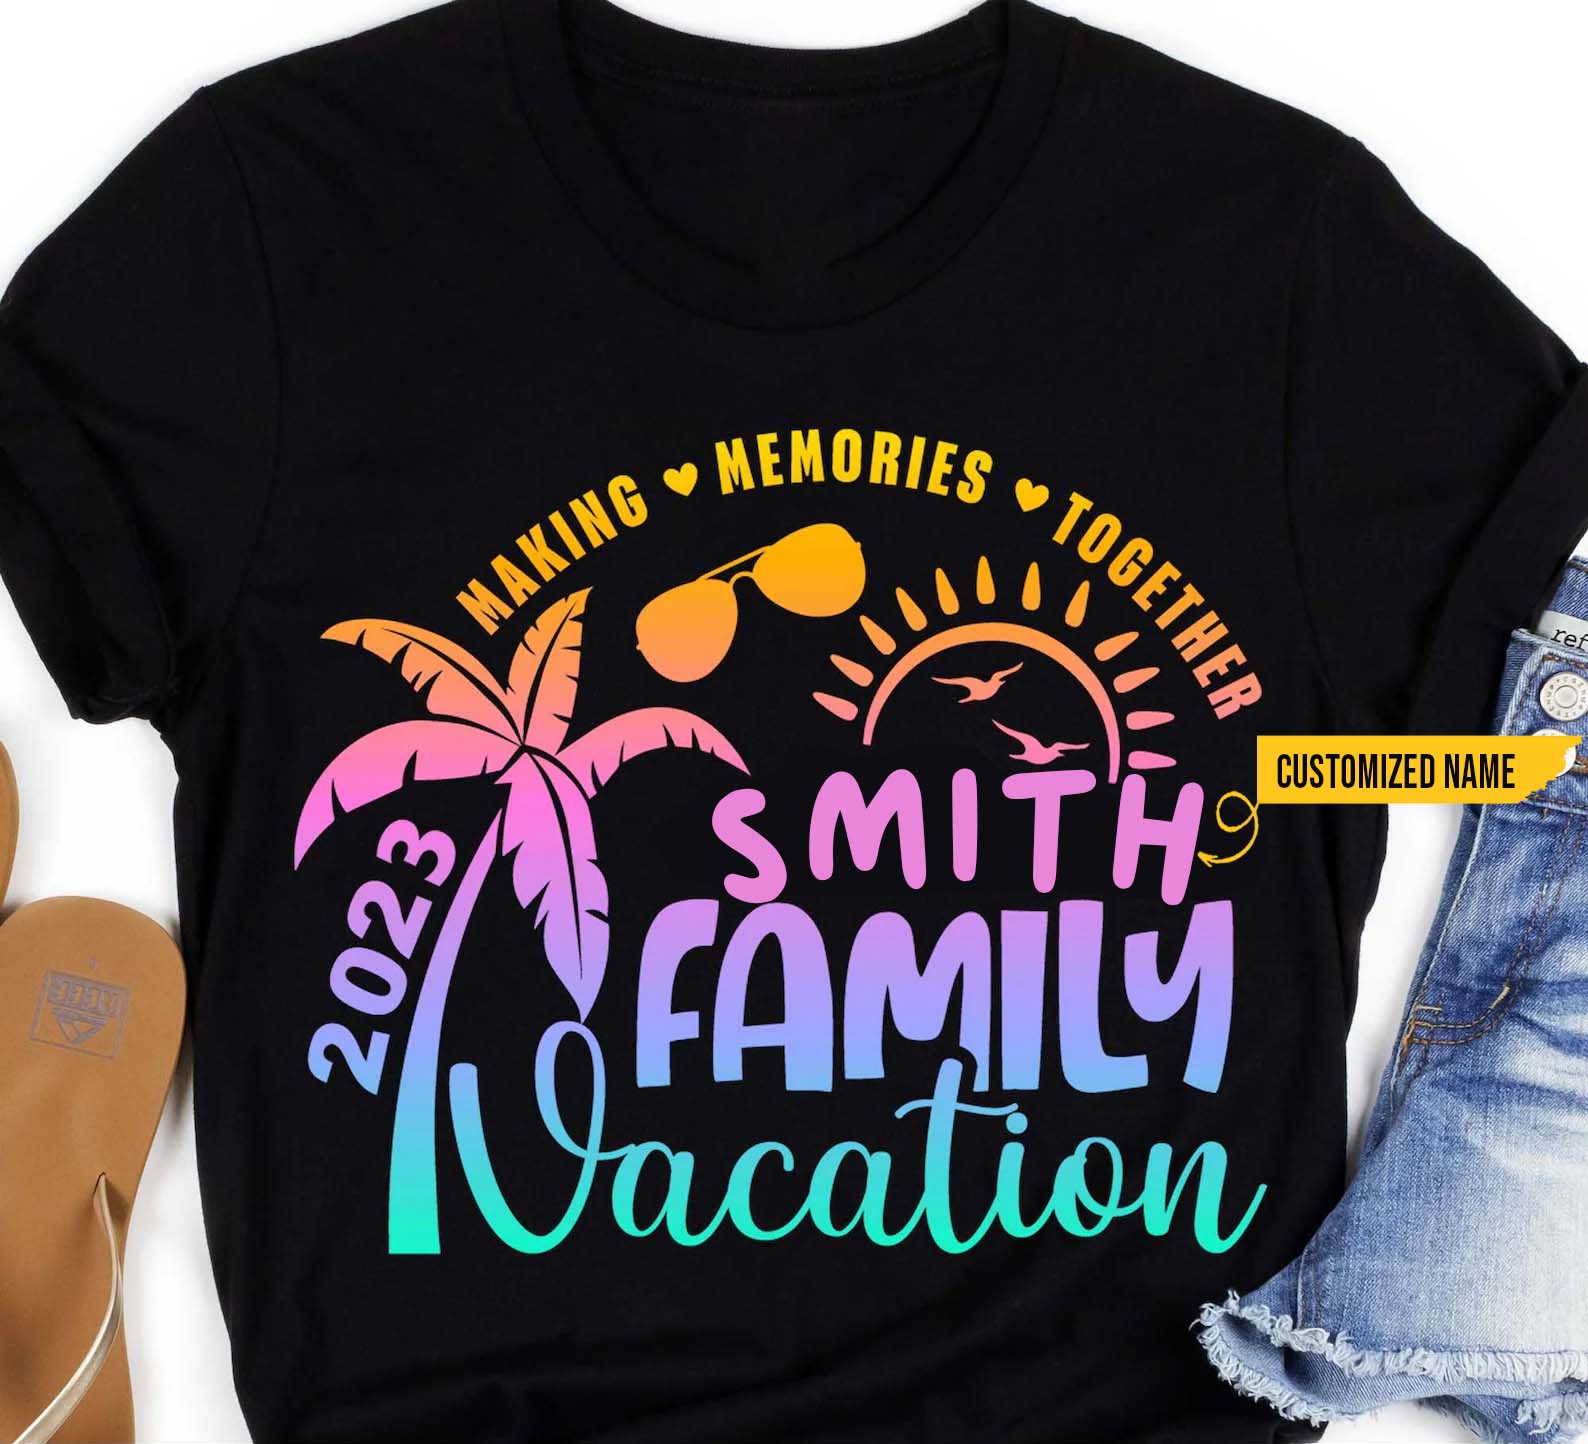 Smith Family Vacation 2023 Shirt, Making Memories Together